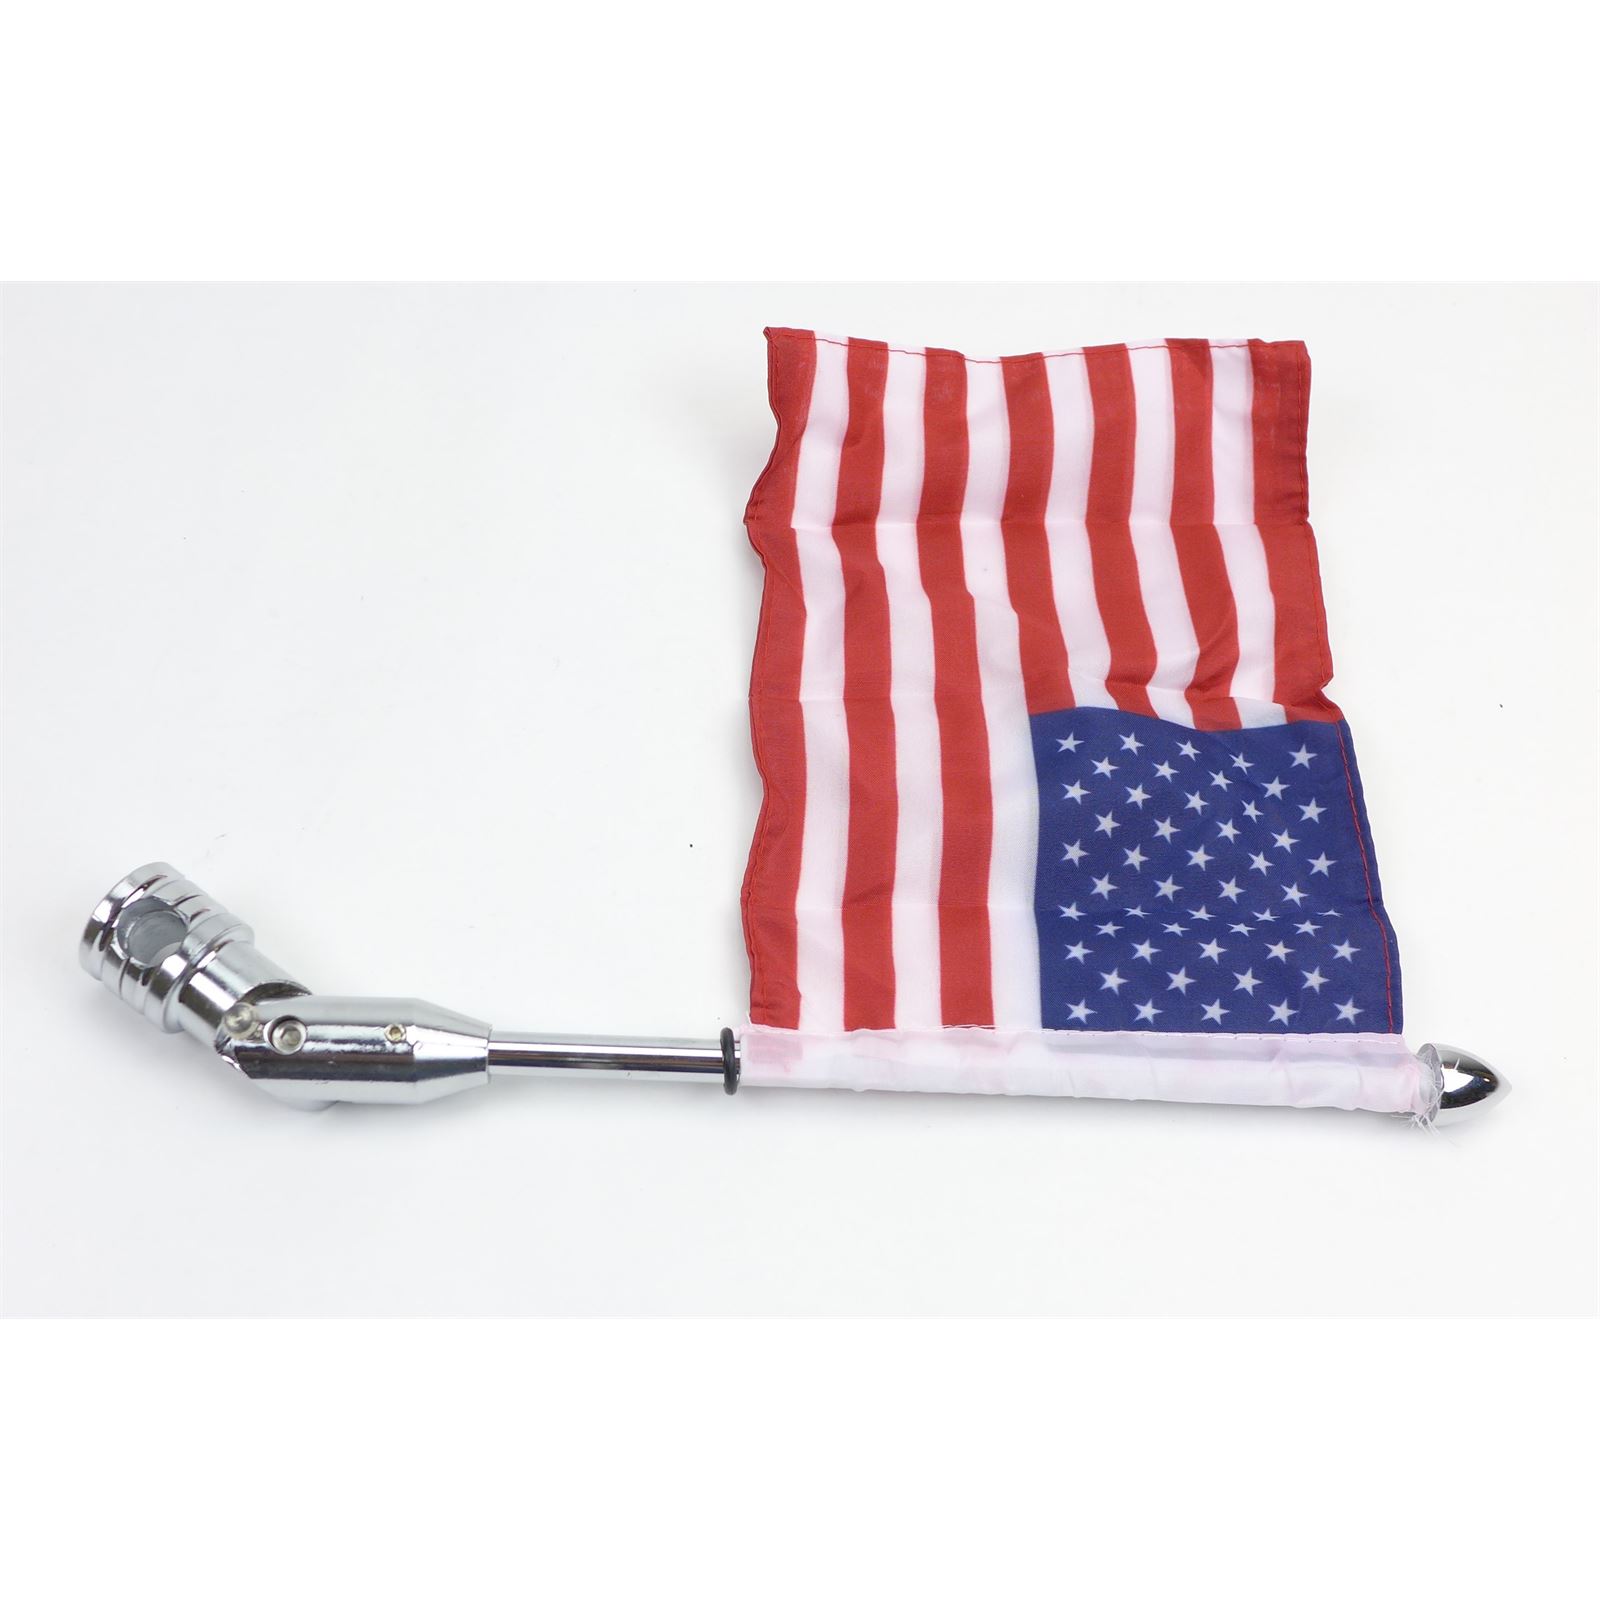 2FastMoto Motorcycle Flag Pole Mount and 6 x 9 Includes Fire Fighter &  American - Motorcycle, ATV / UTV & Powersports Parts